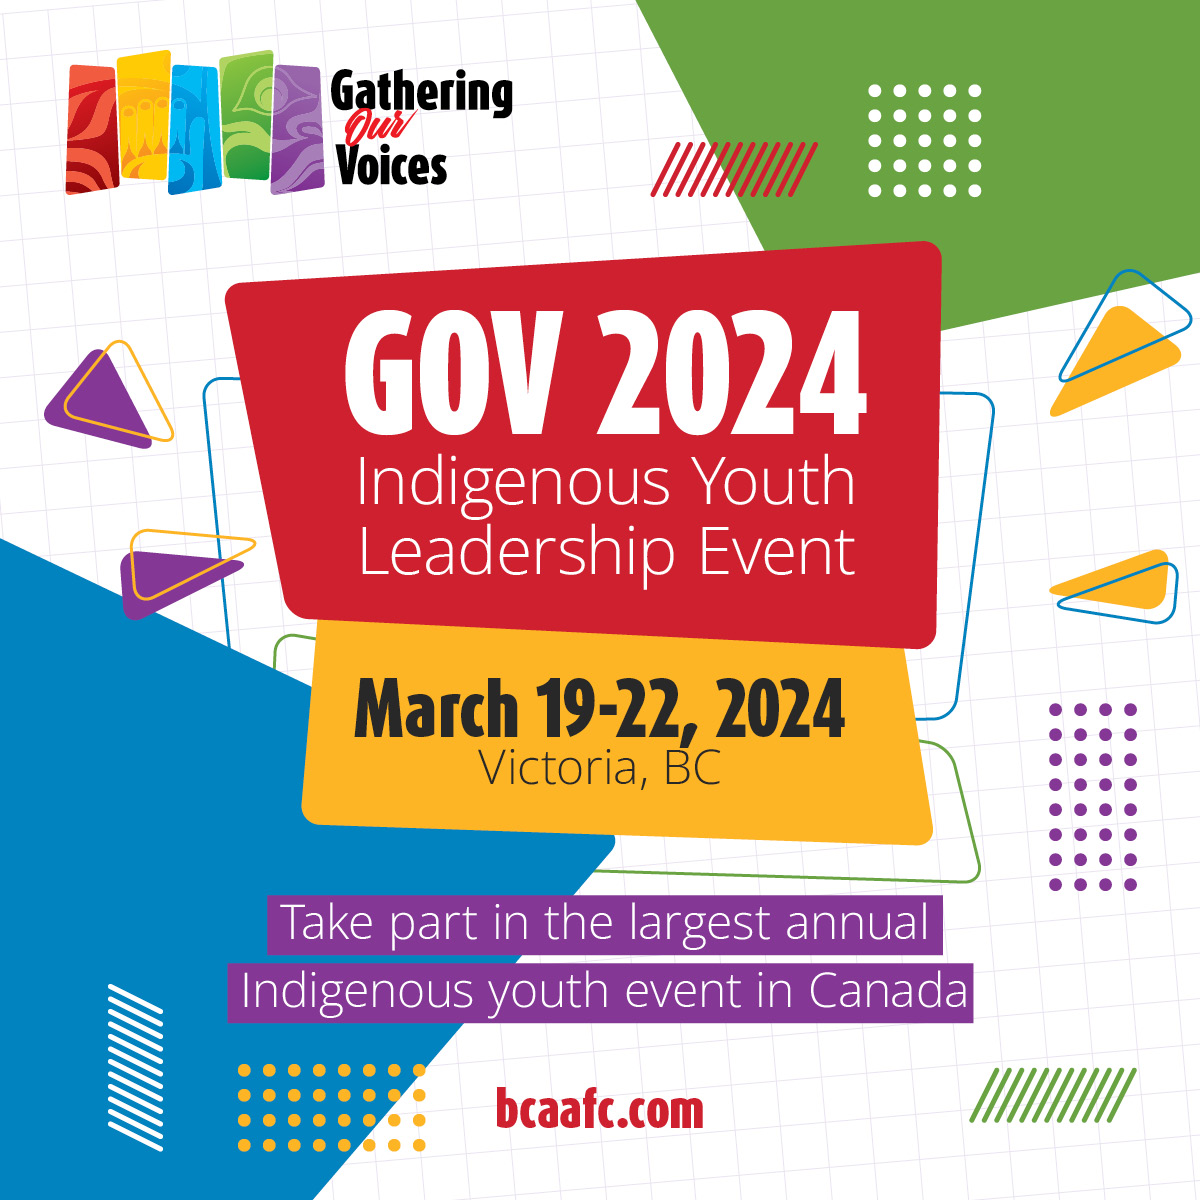 📢 Save the Date! Gathering Our Voices (GOV) is coming to Victoria, BC from March 19-22, 2024! 🎉 Sign up for our newsletter and follow @GOV_Event so you don't miss an update! gatheringourvoices.ca